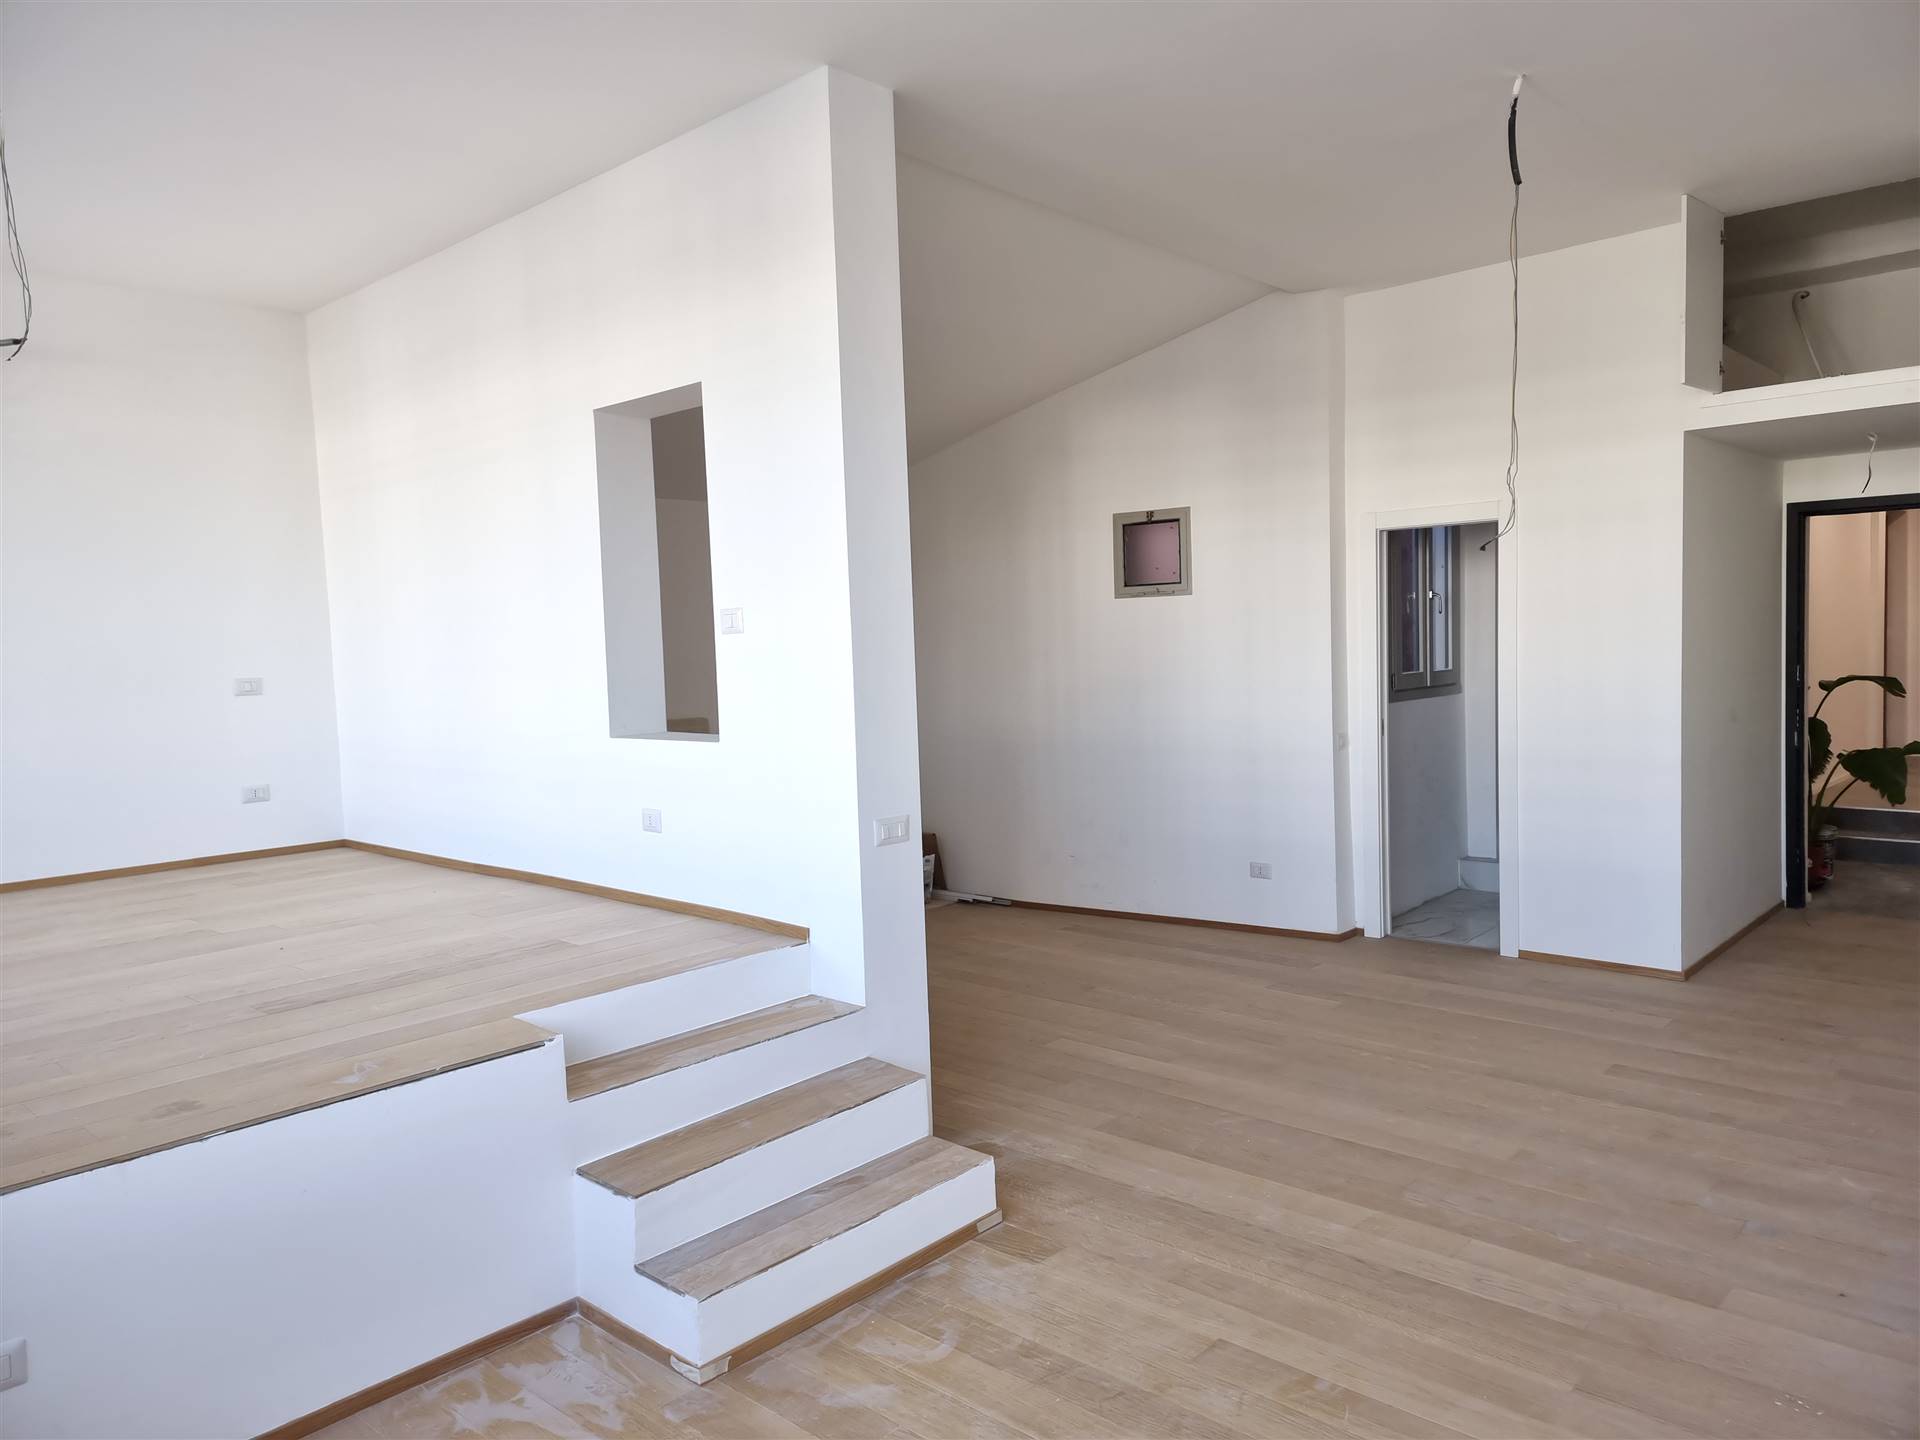 PONTE NUOVO, MILANO, Loft for sale of 61 Sq. mt., New construction, Heating Individual heating system, Energetic class: B, Epi: 40 kwh/m2 year, 